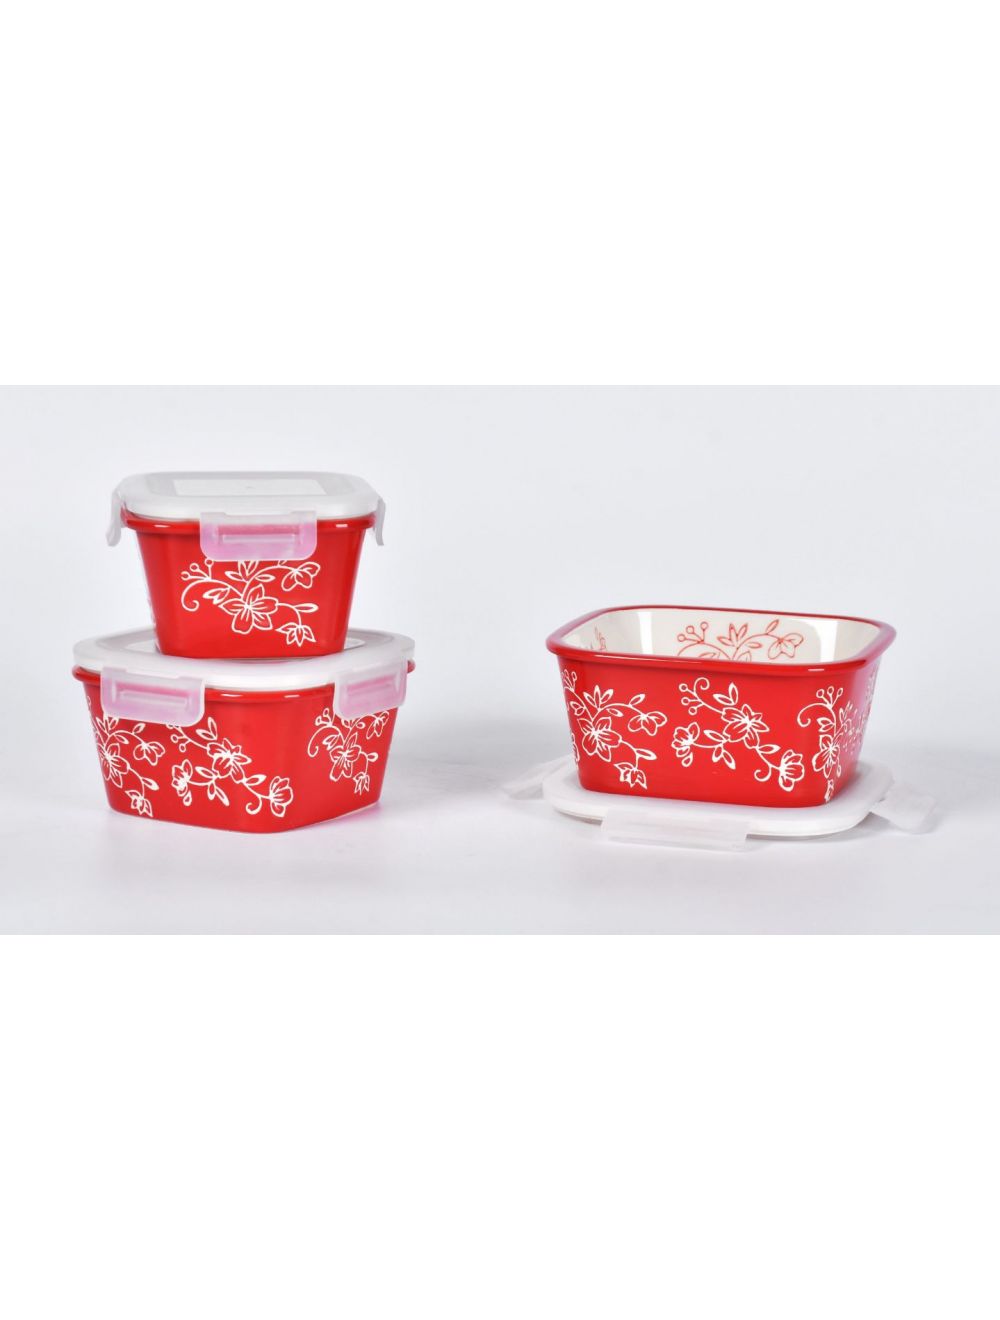 Temp-tations® Floral Lace Nesting Square Ceramic Containers with Lid - 3 Piece - Red-T49058-172